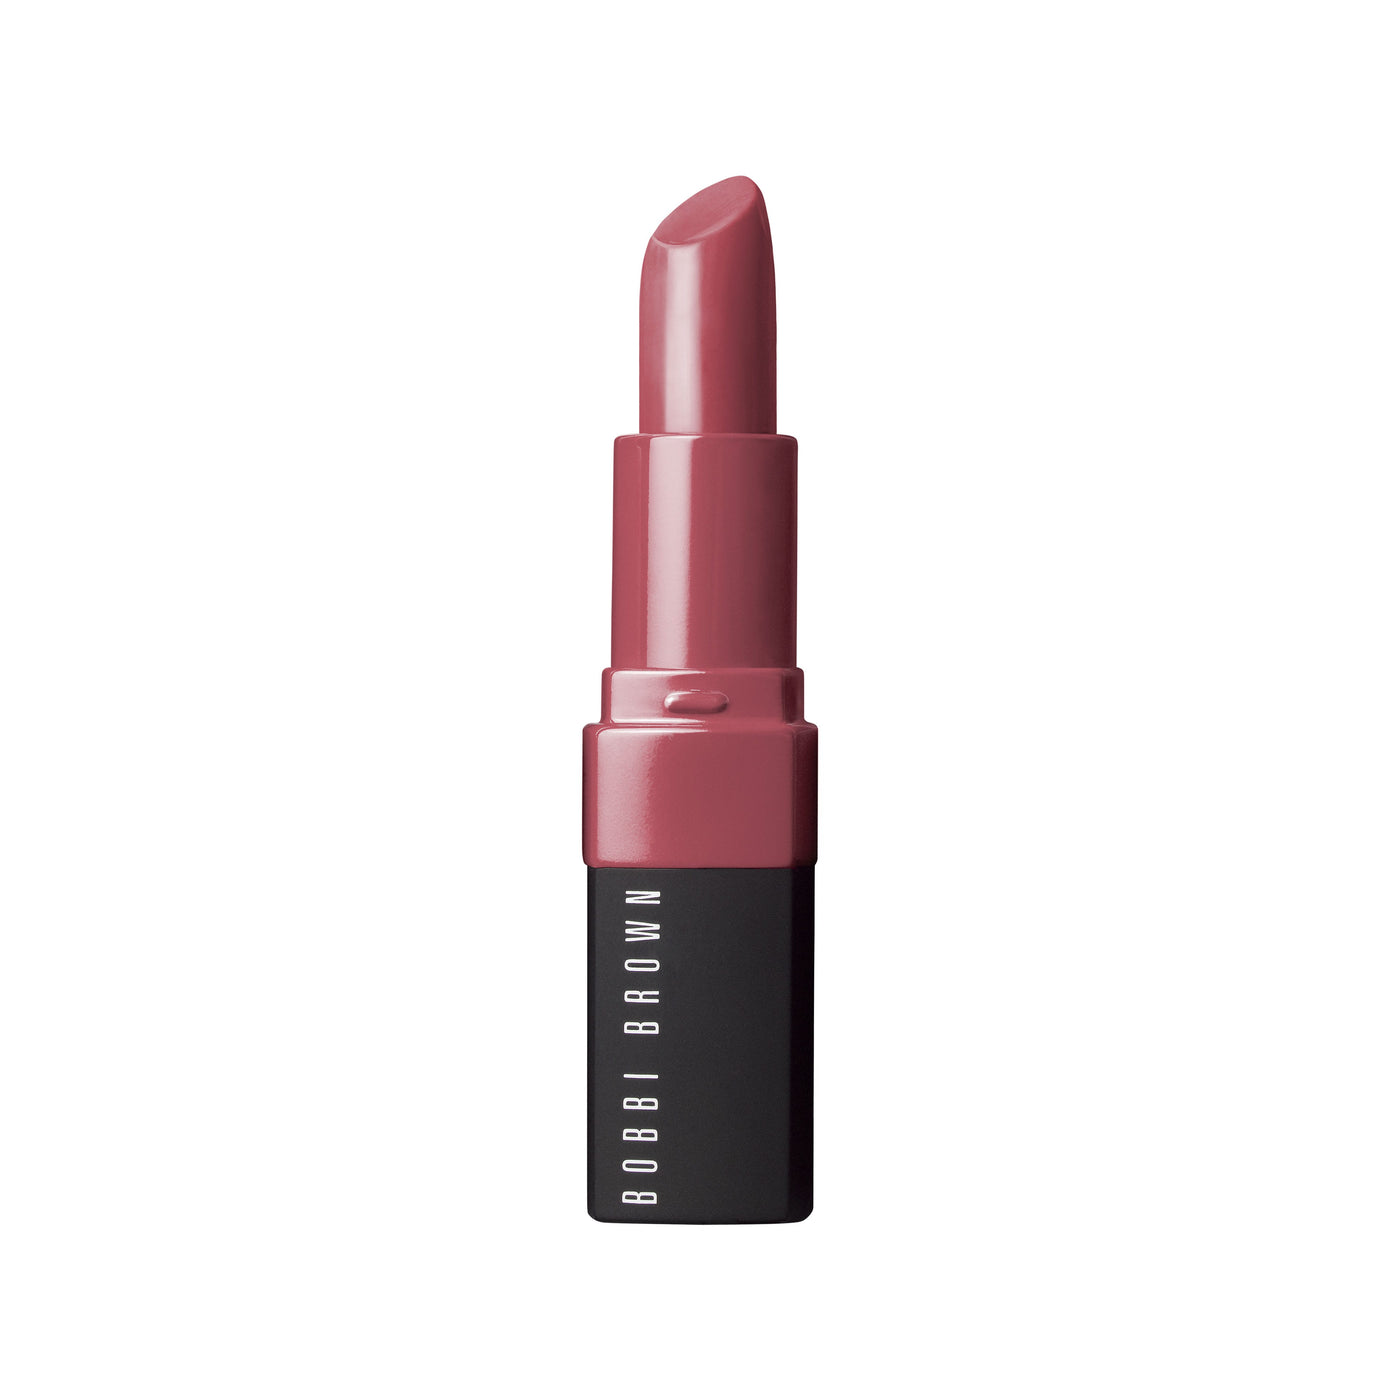 Shop The Latest Collection Of Bobbi Brown Crushed Lip Color- Lived In Look & Balm Like Hydration In Lebanon